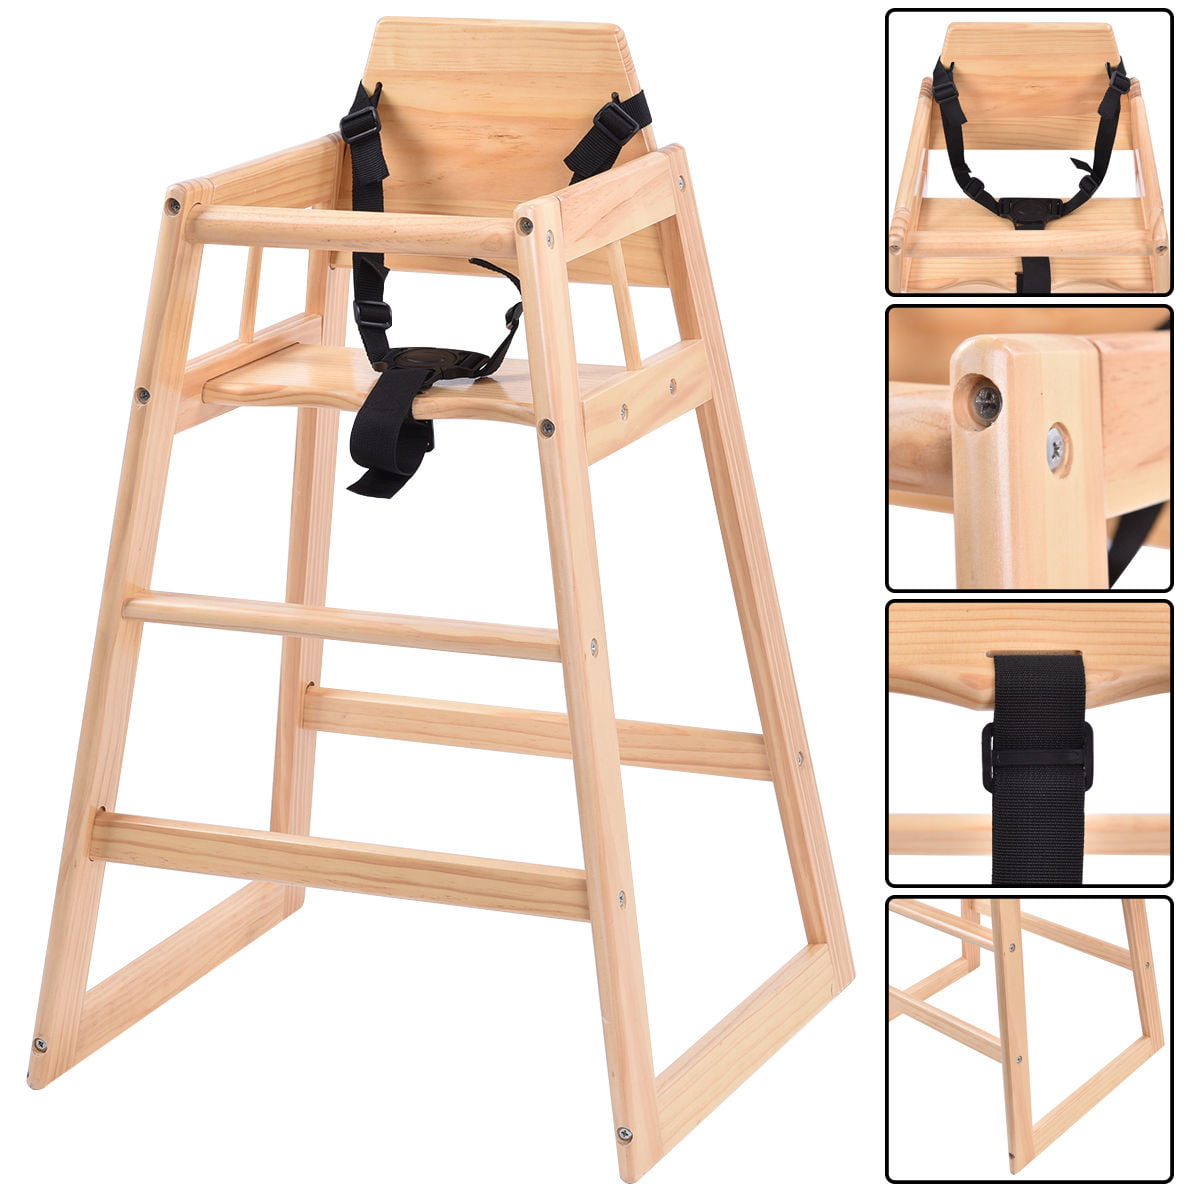 Costway Baby High Chair Wooden Stool Infant Feeding ...